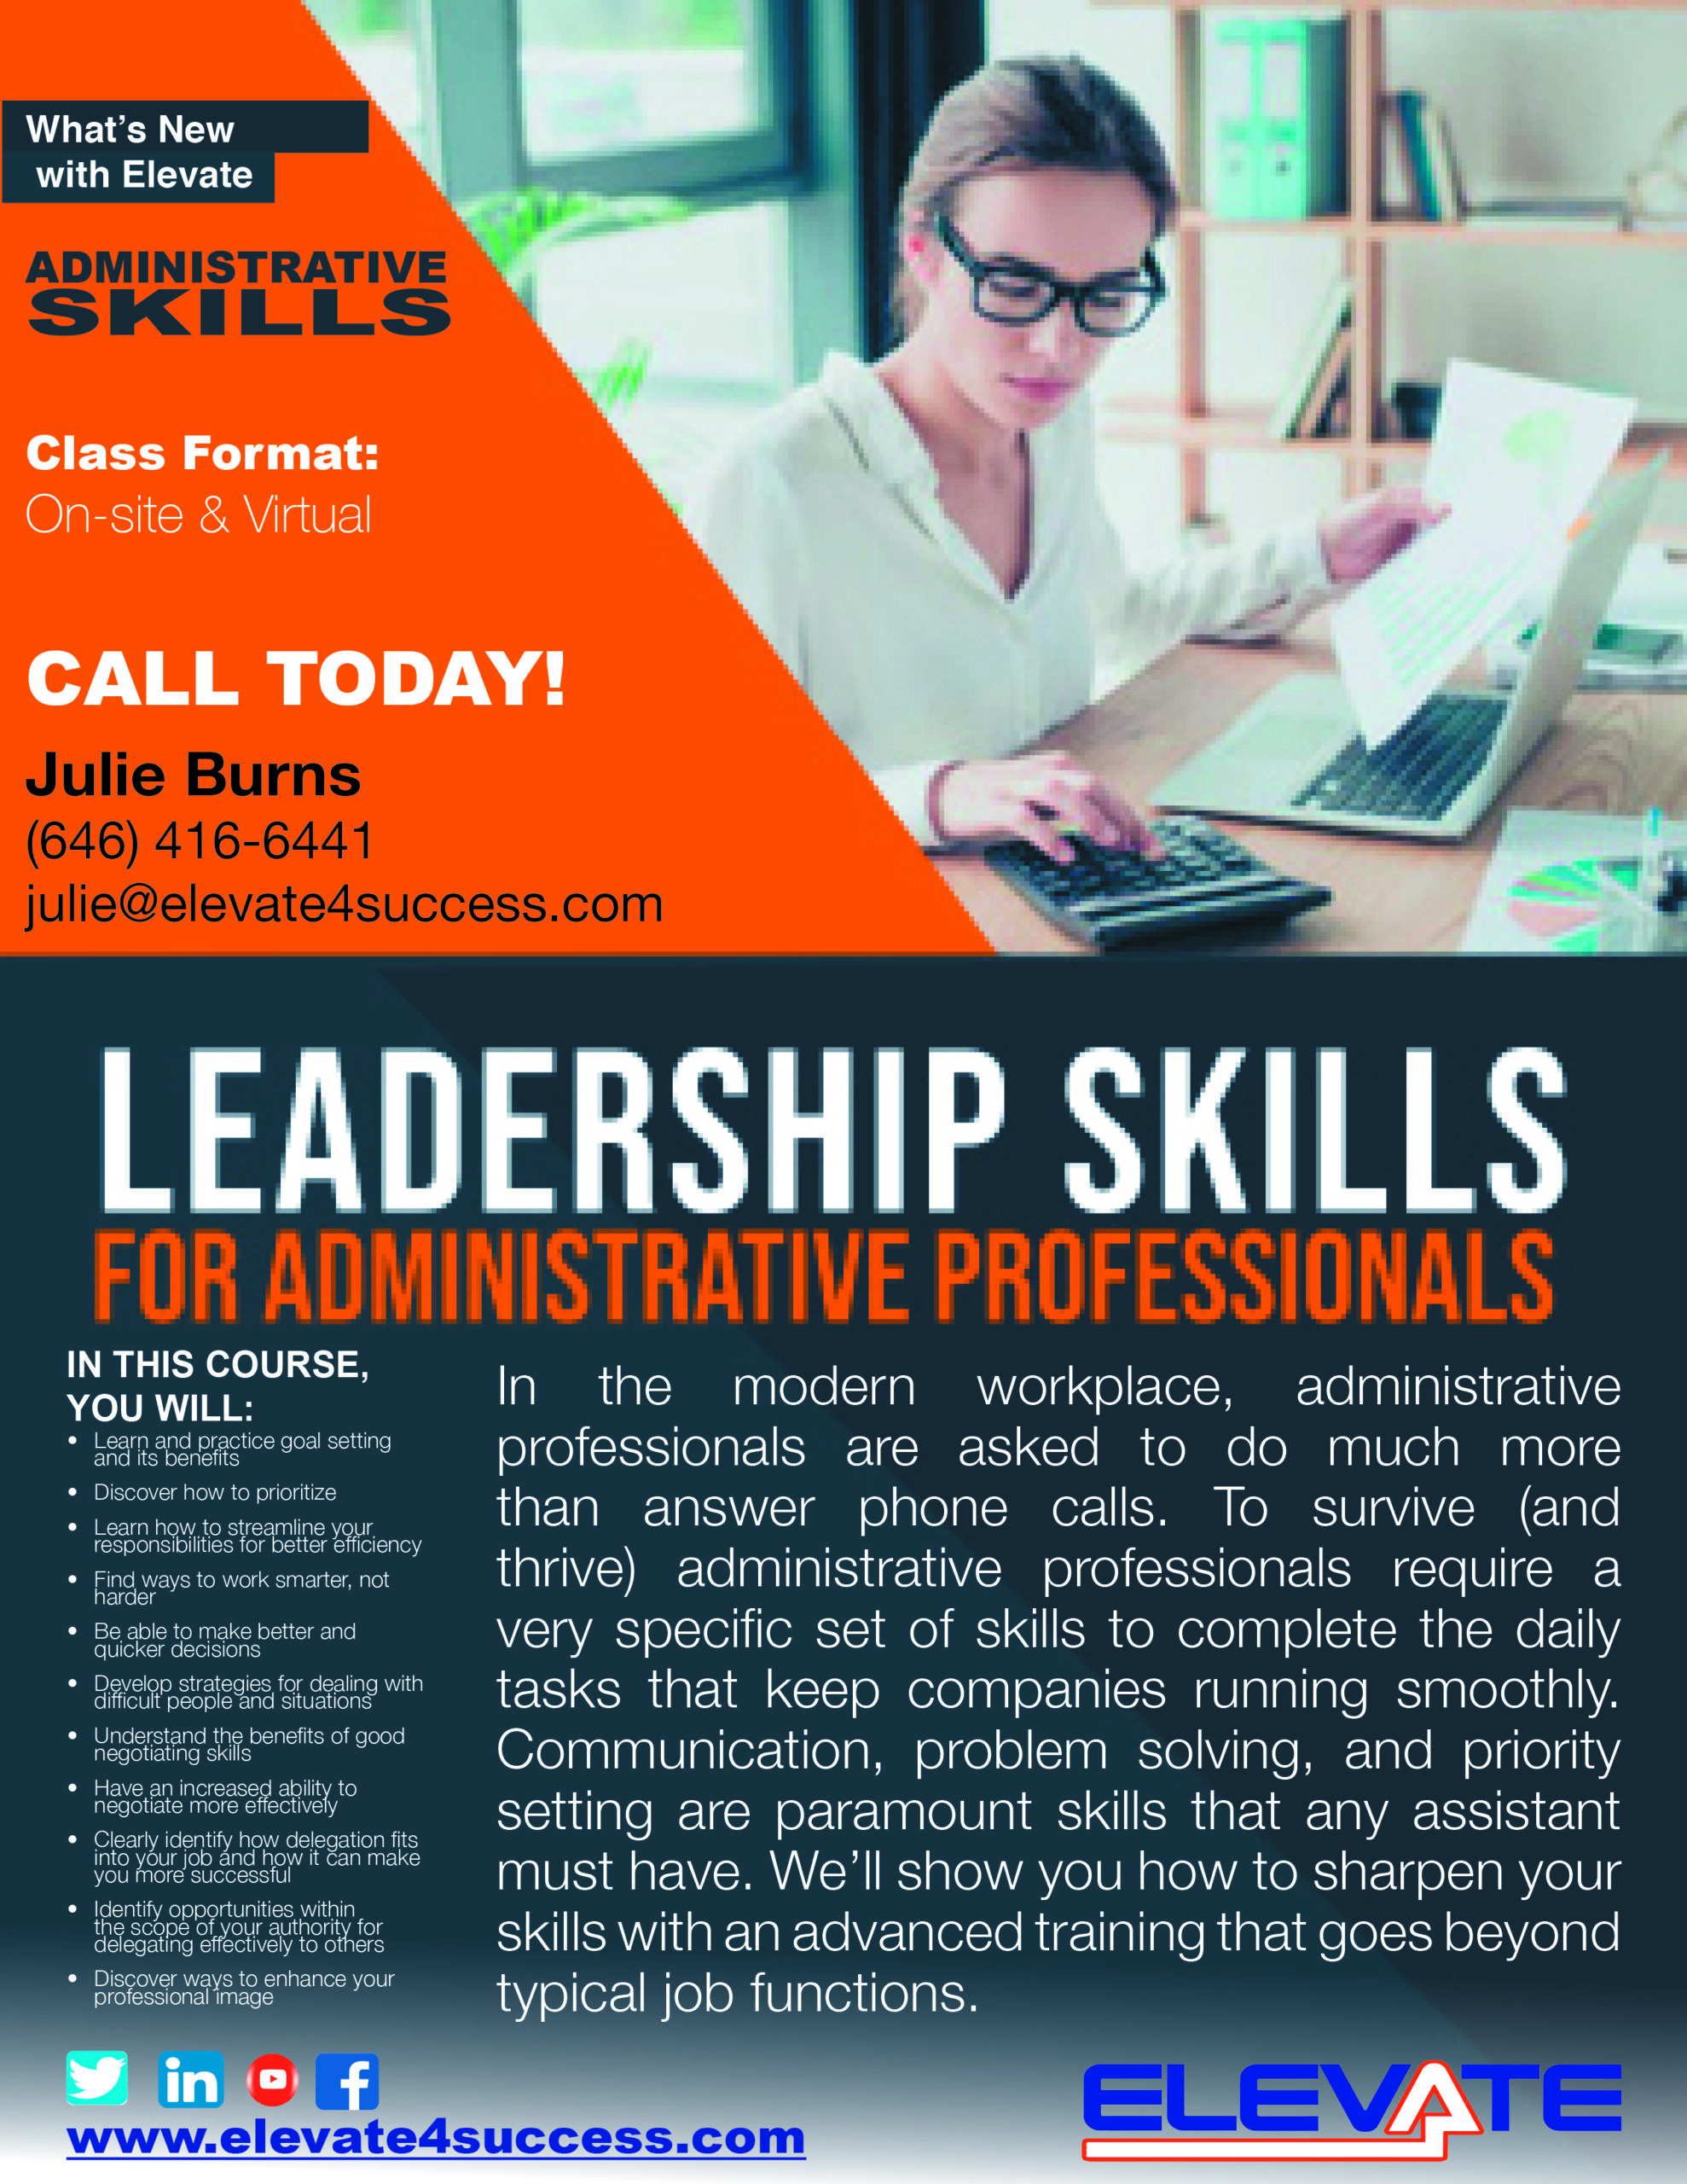 Leadership Skills for Great Administrative Professionals USA Sales Flyer